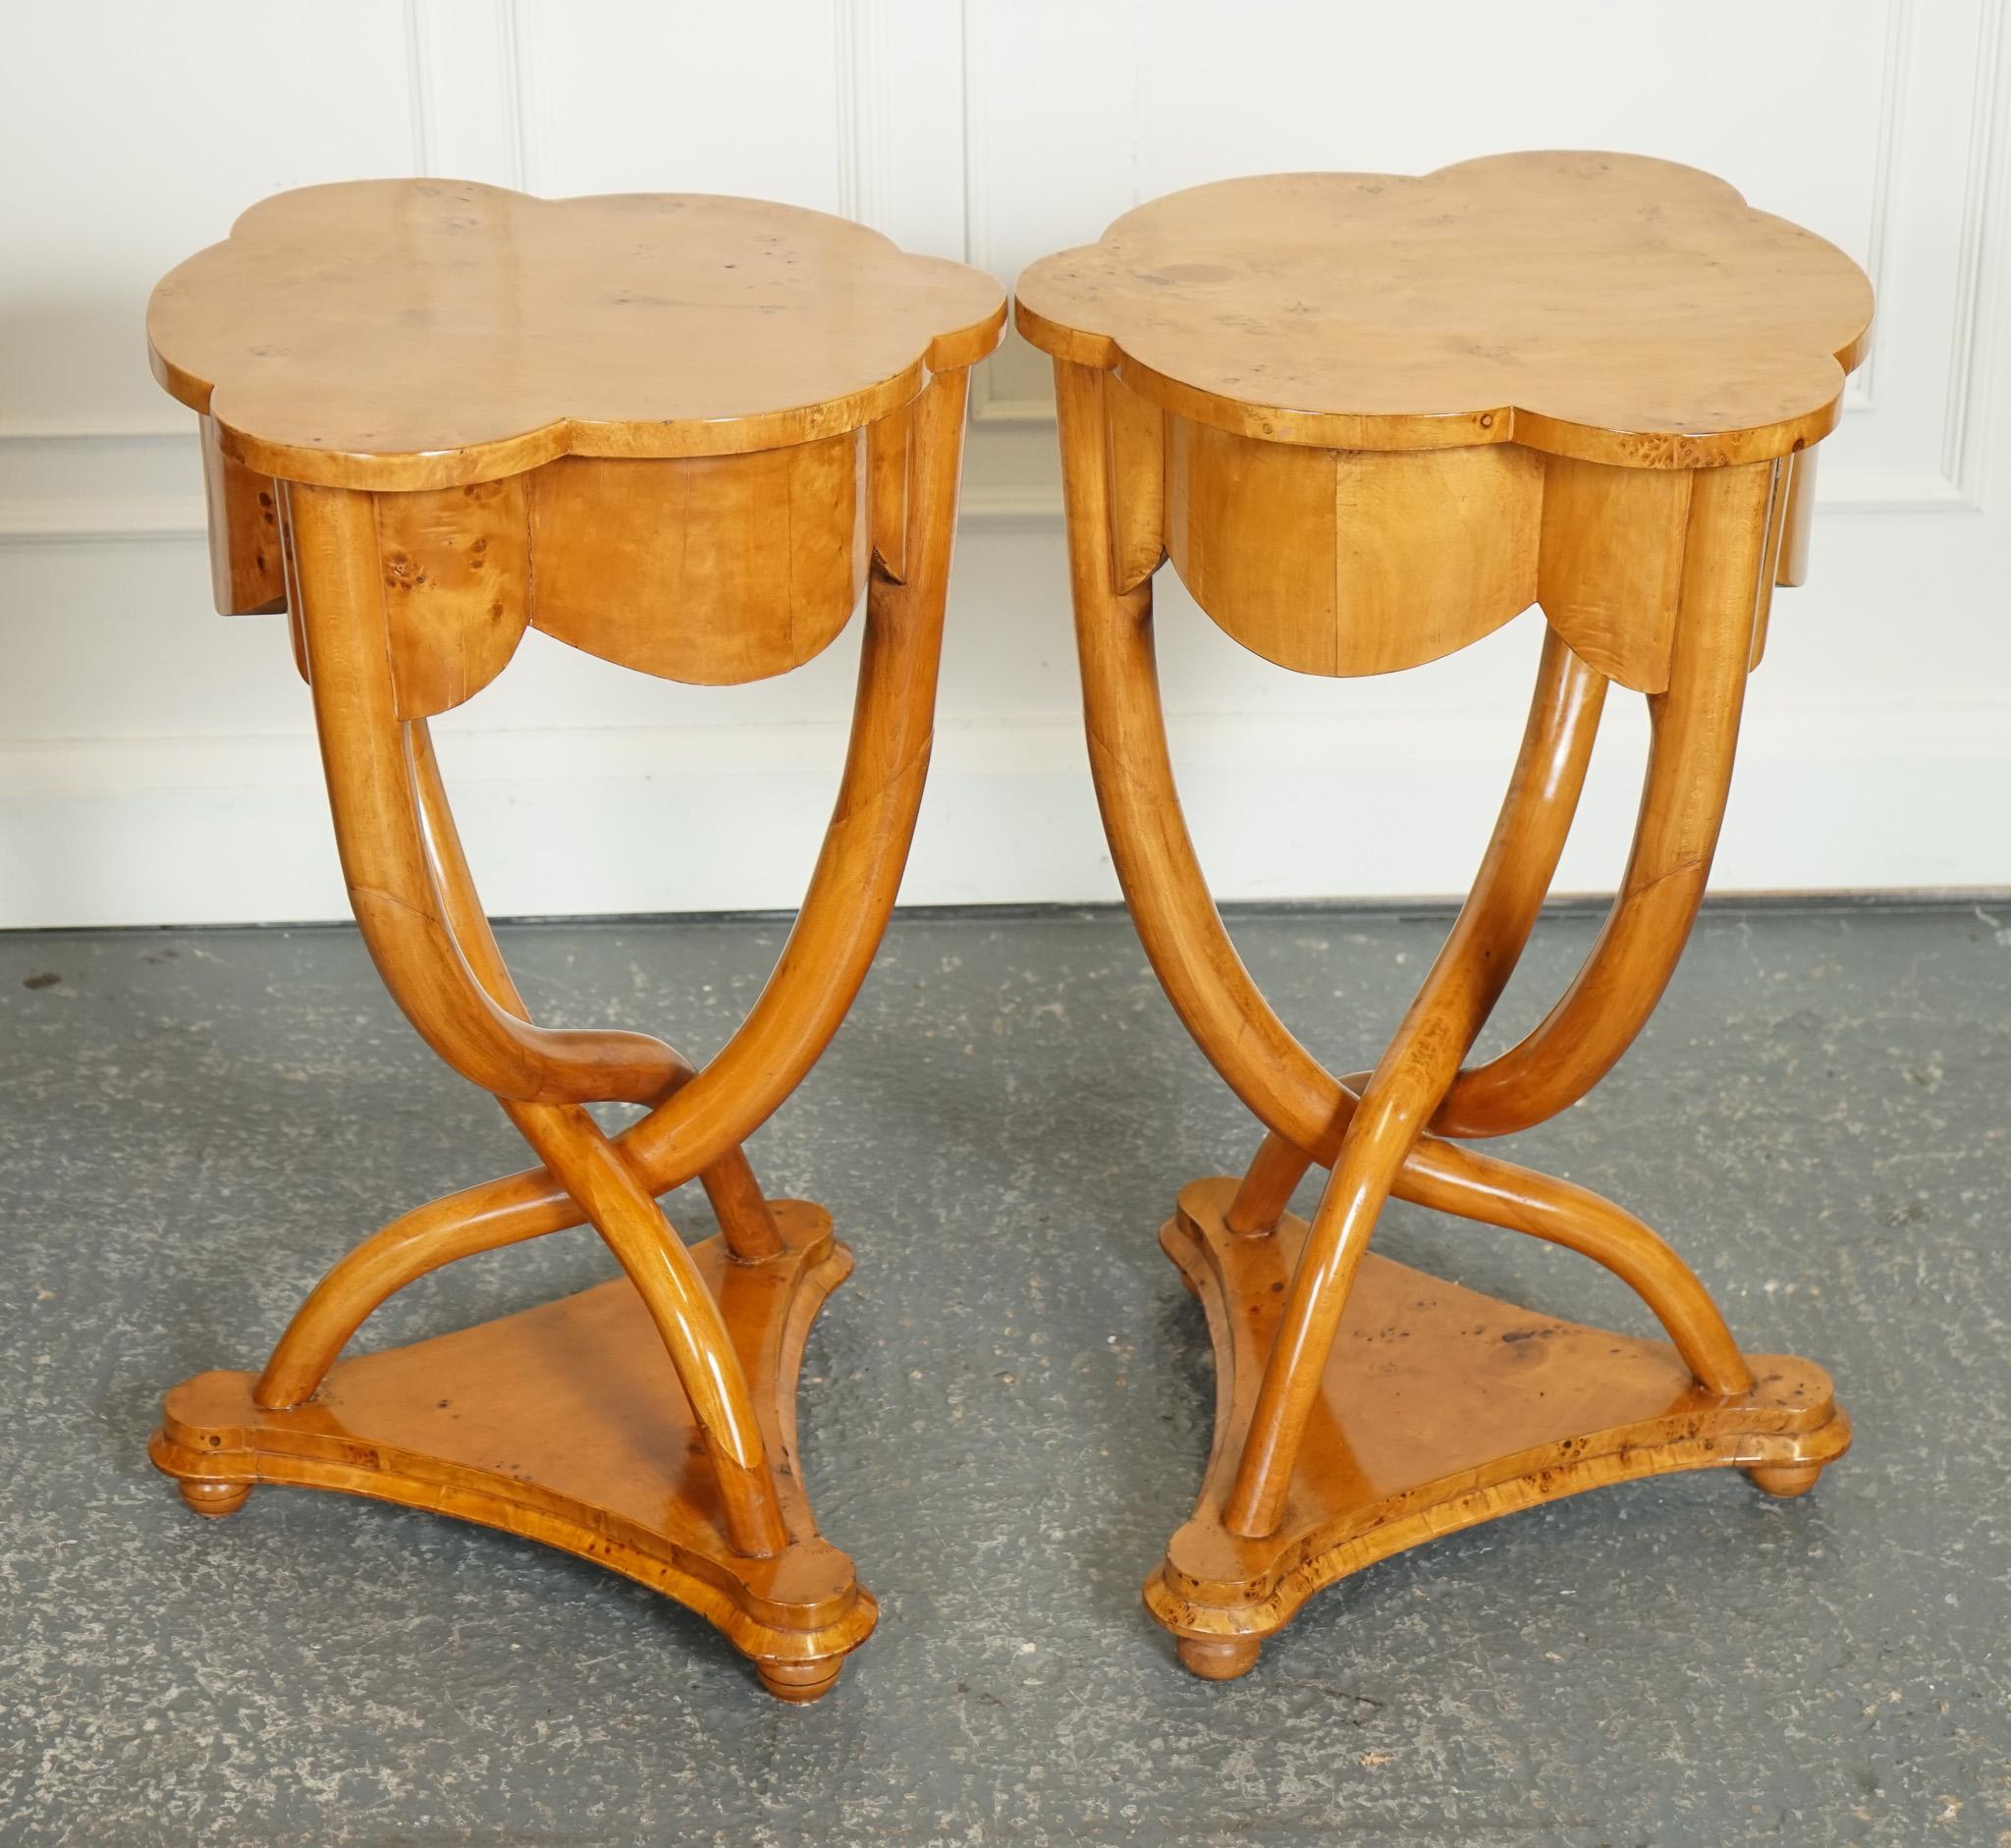 British PAIR ART DECO WALNUT OCCASIONAL BEDSIDE NiGHTSTAND TABLES CURVED LEGS J1